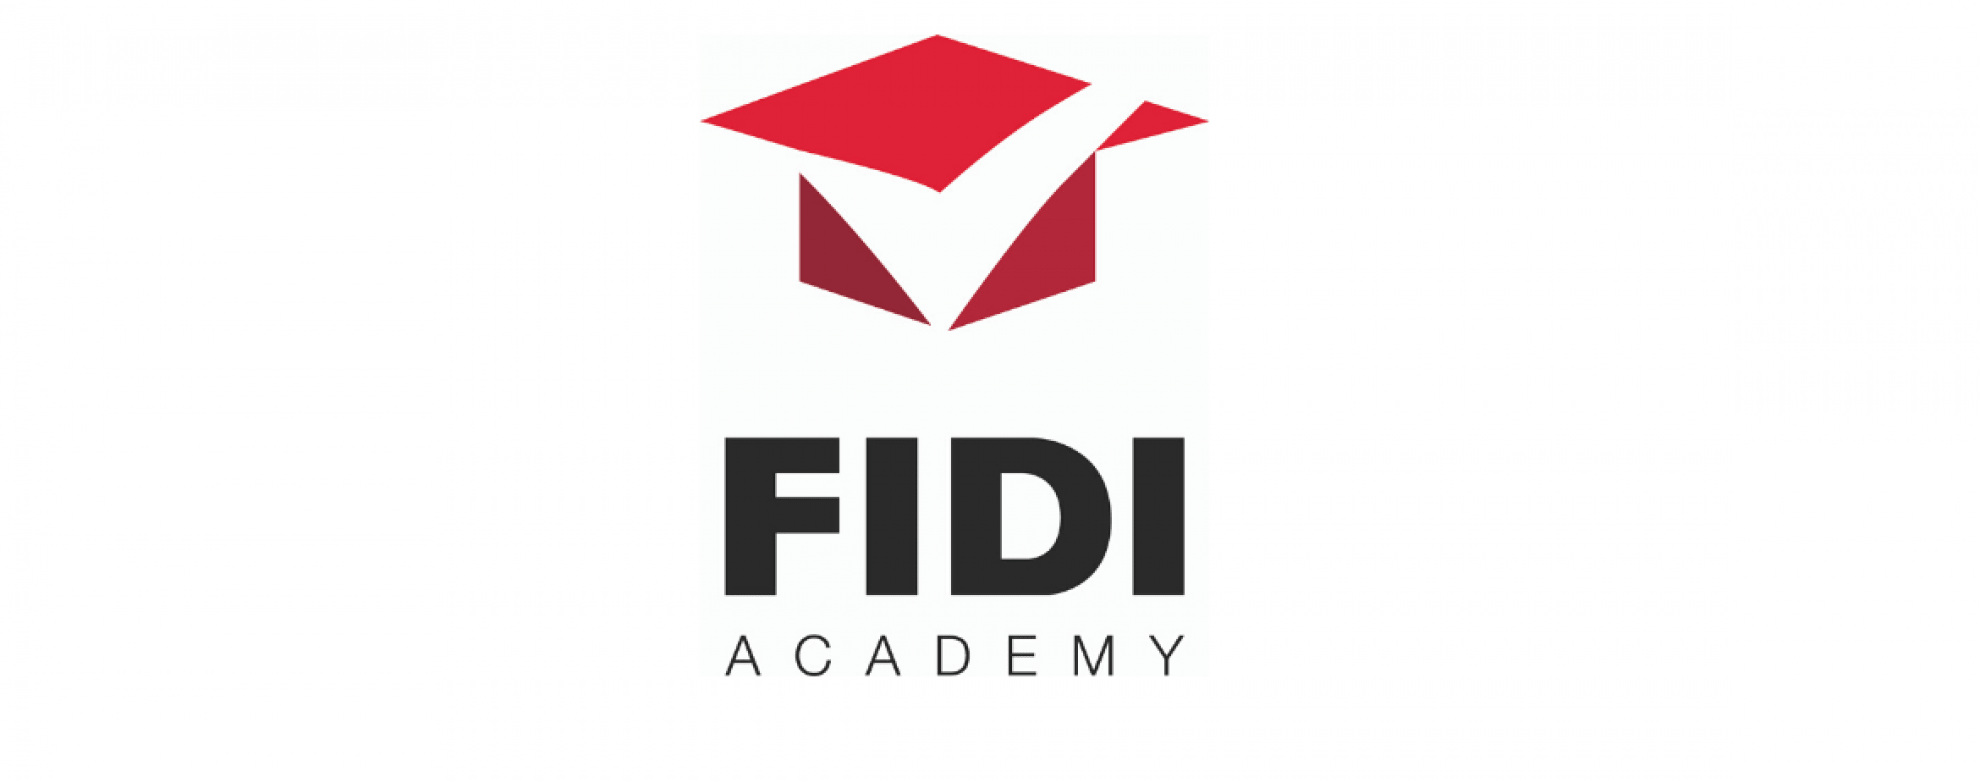 FIDI Academy launches Corporate Sustainability online training